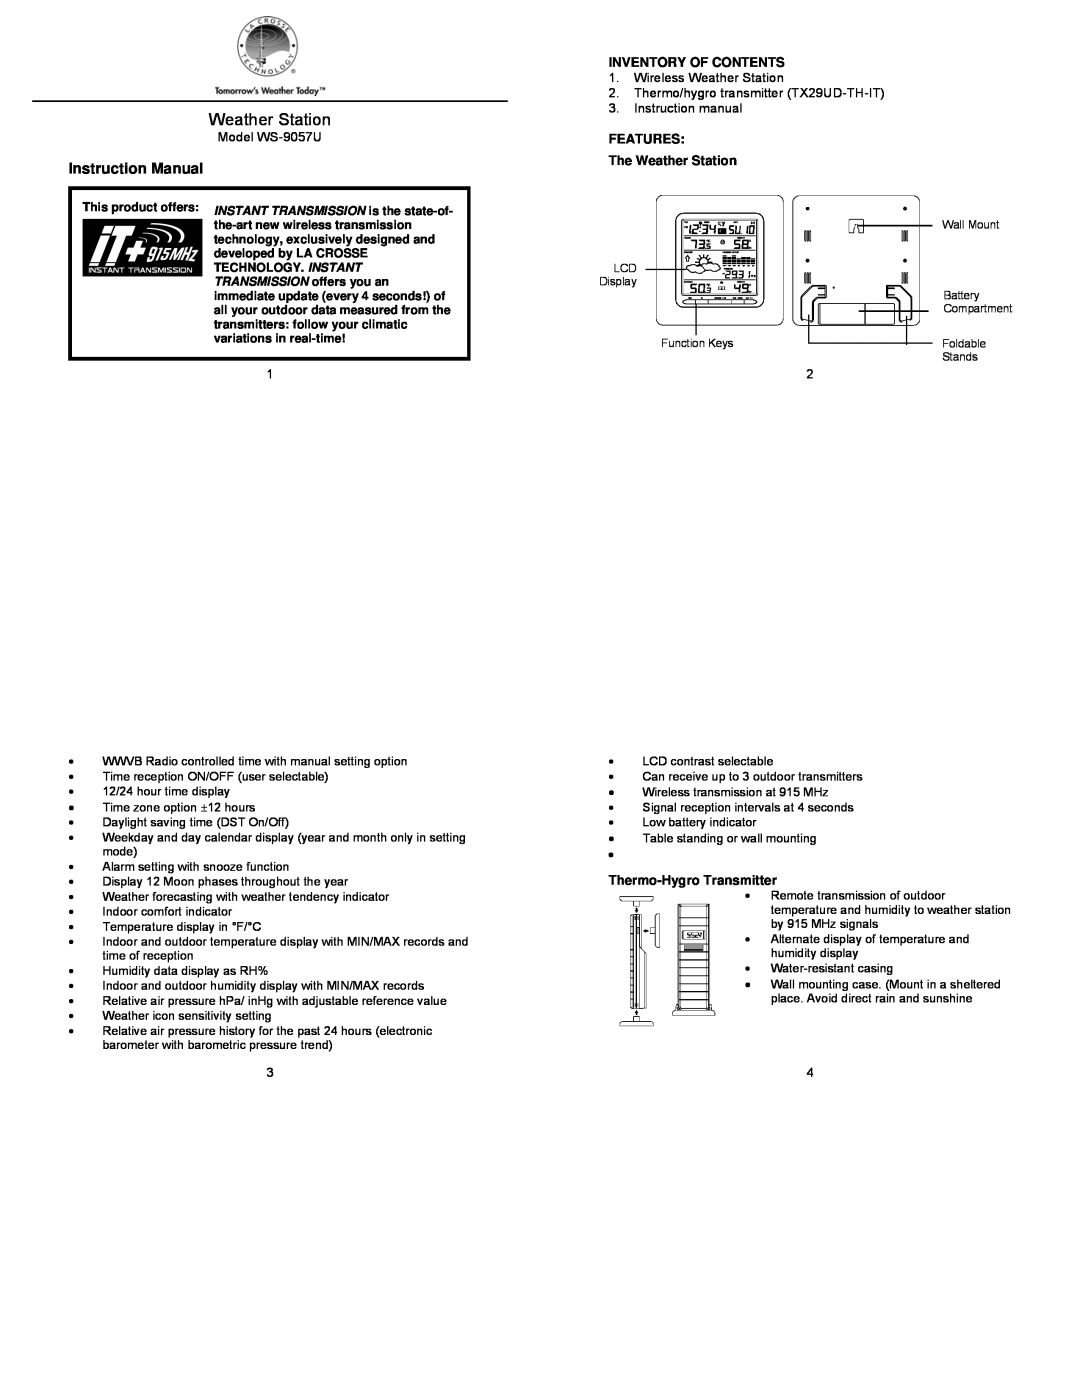 La Crosse Technology instruction manual Model WS-9057U, Inventory Of Contents, Wireless Weather Station 